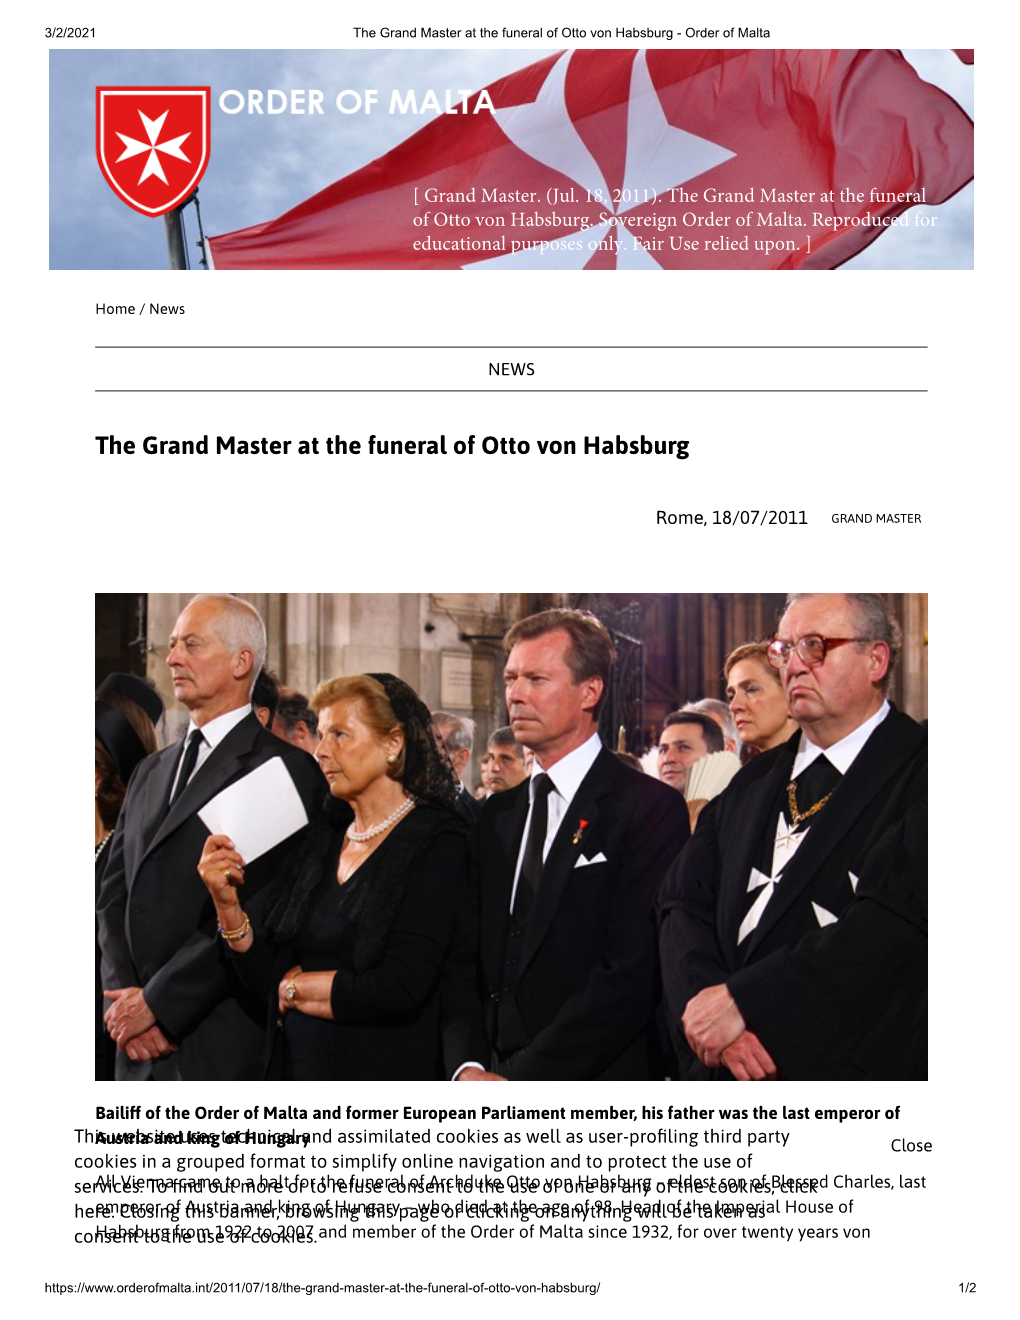 The Grand Master at the Funeral of Otto Von Habsburg - Order of Malta